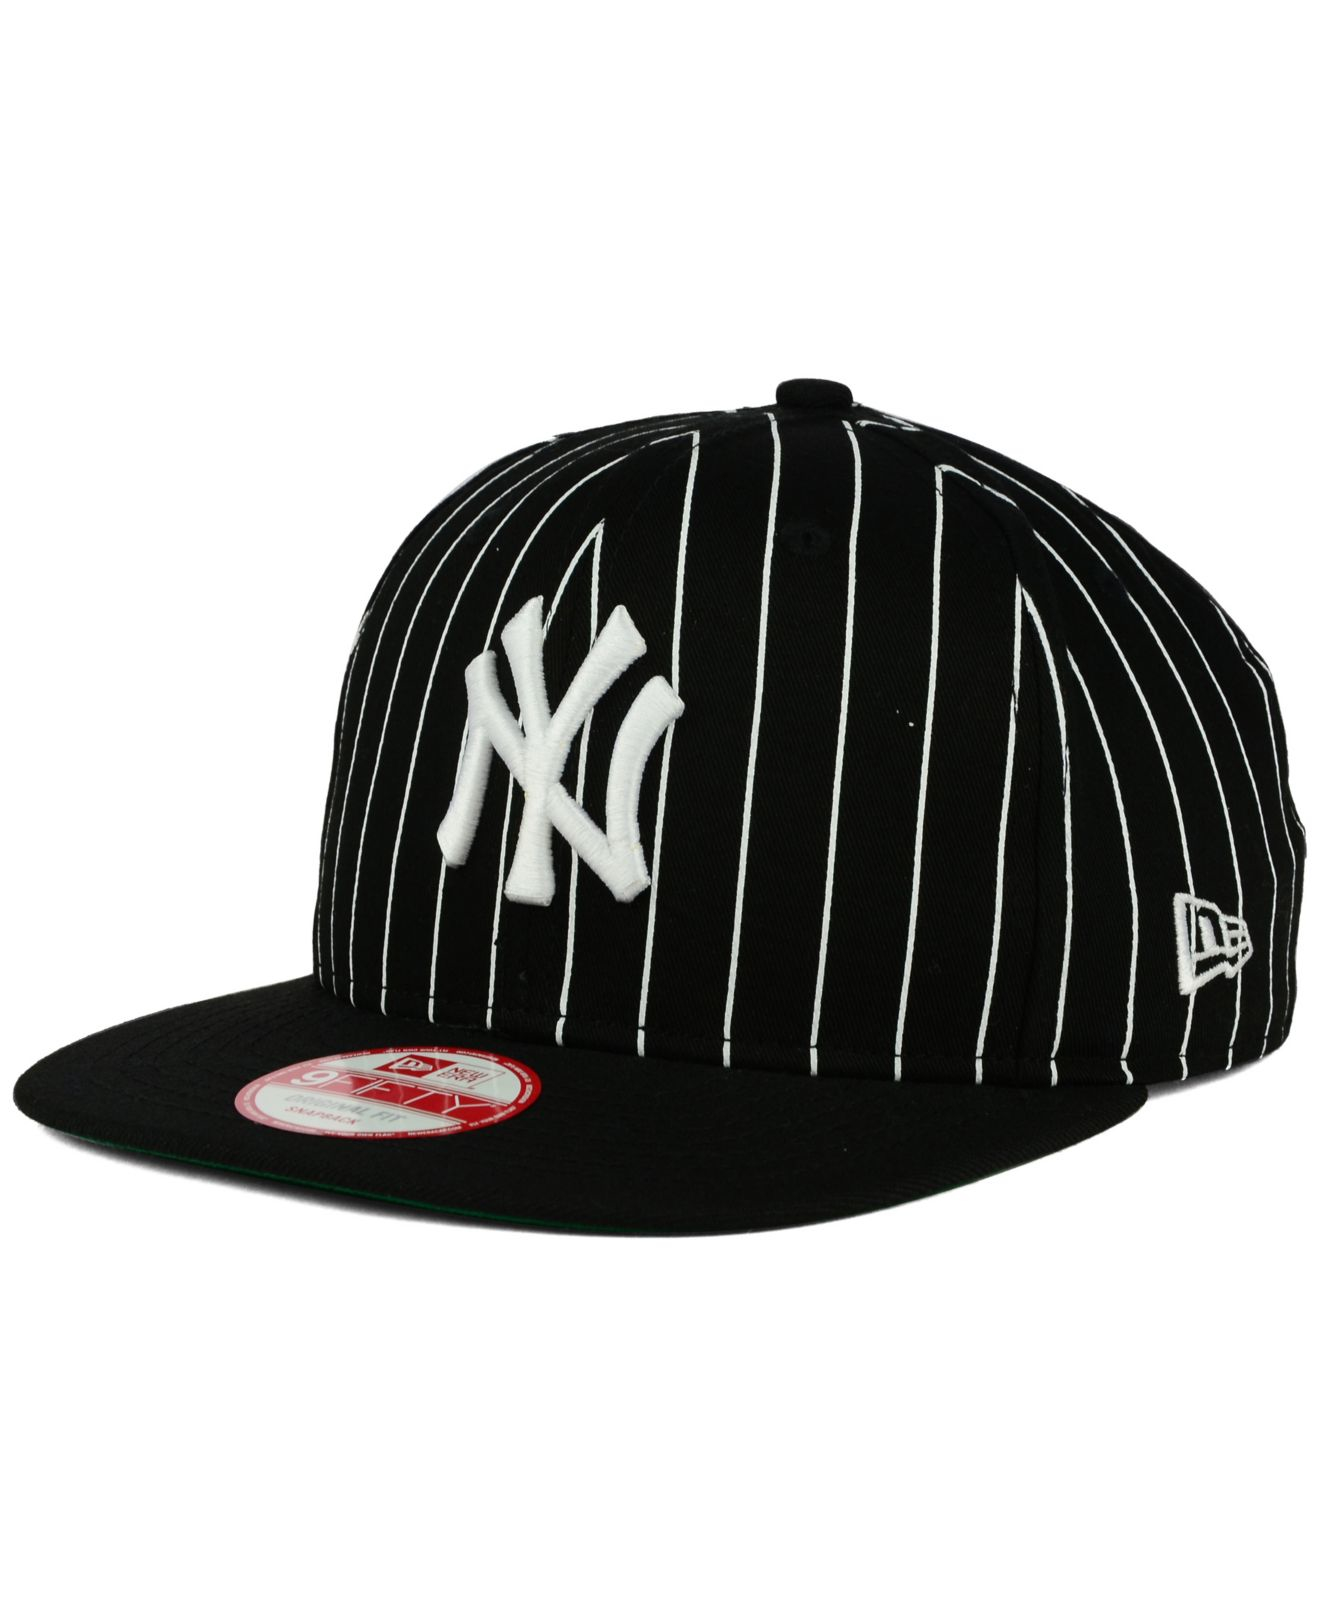 NWT Mitchell & Ness NY Yankees Fitted Hat Cap Black w/ Tiger